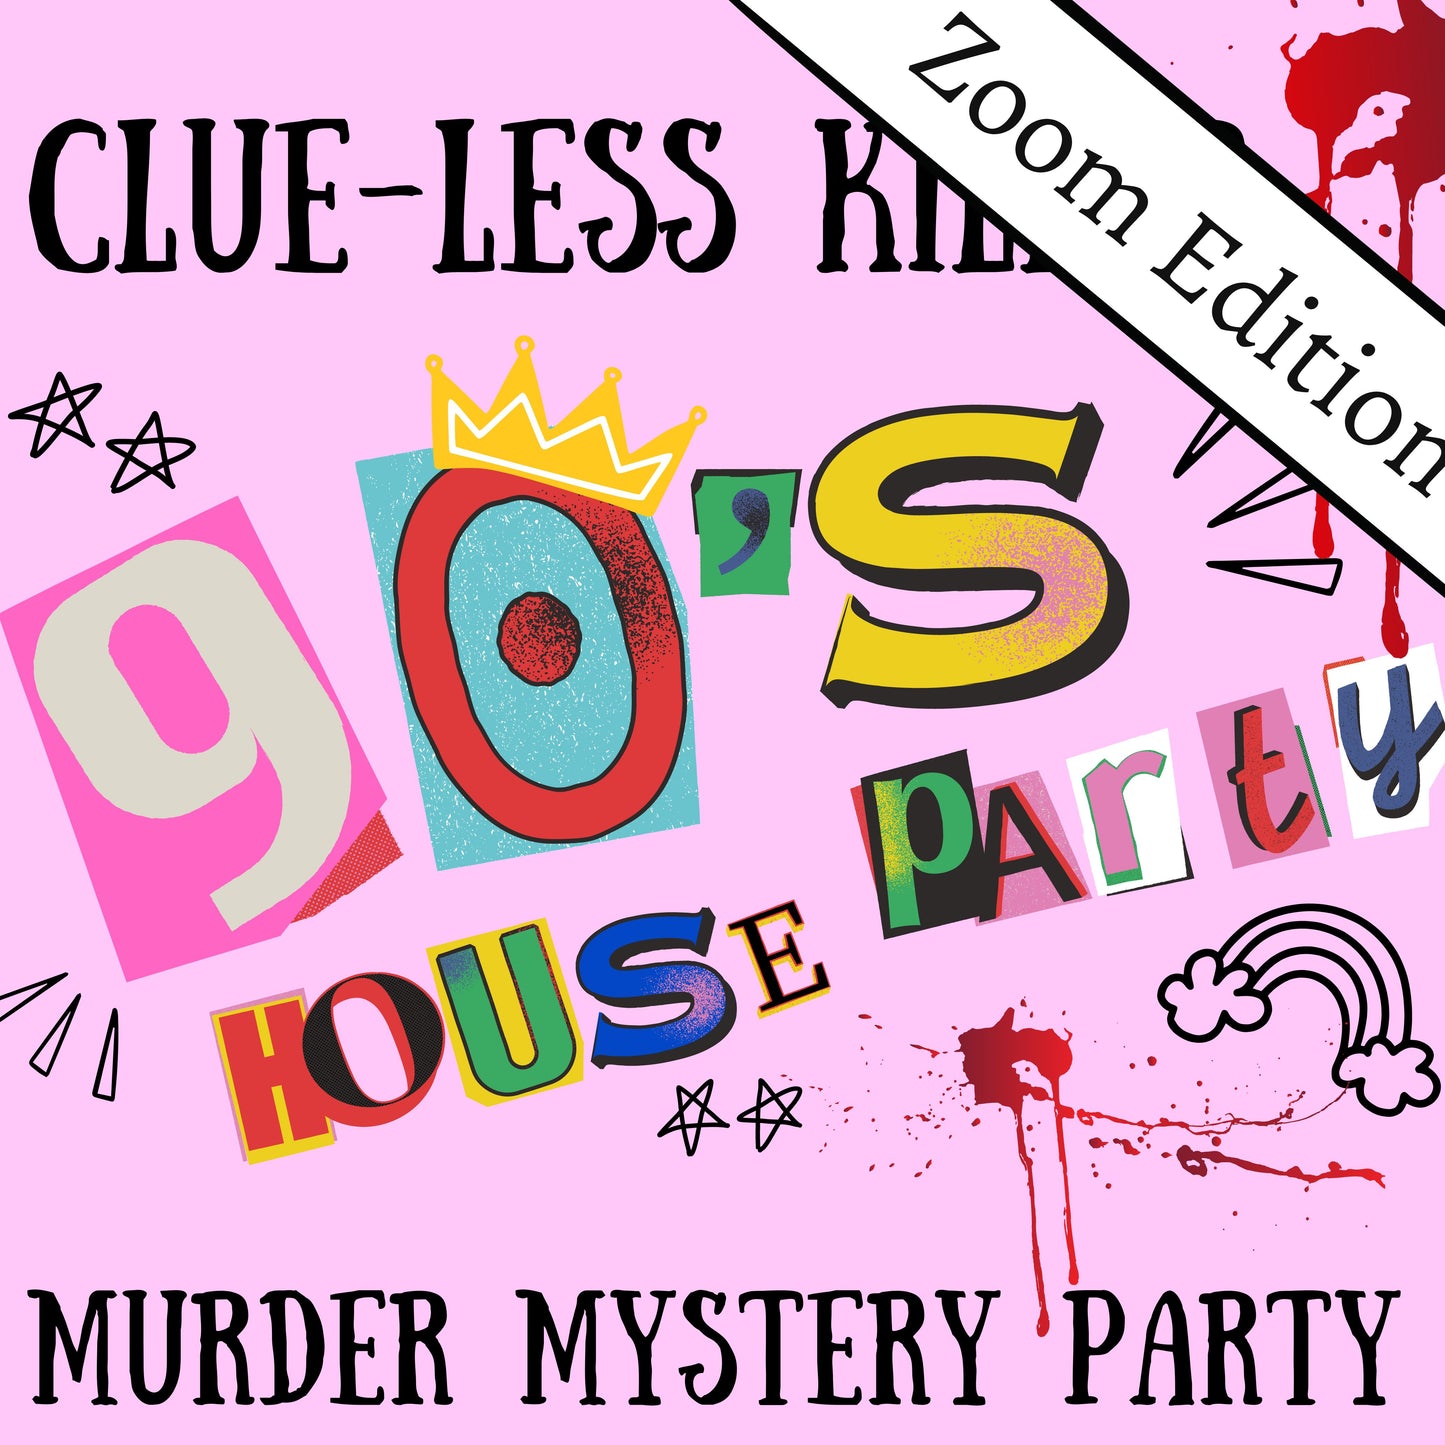 Fun and colourful fully scripted 90s house party themed murder mystery party game for 5-10 players zoom edition